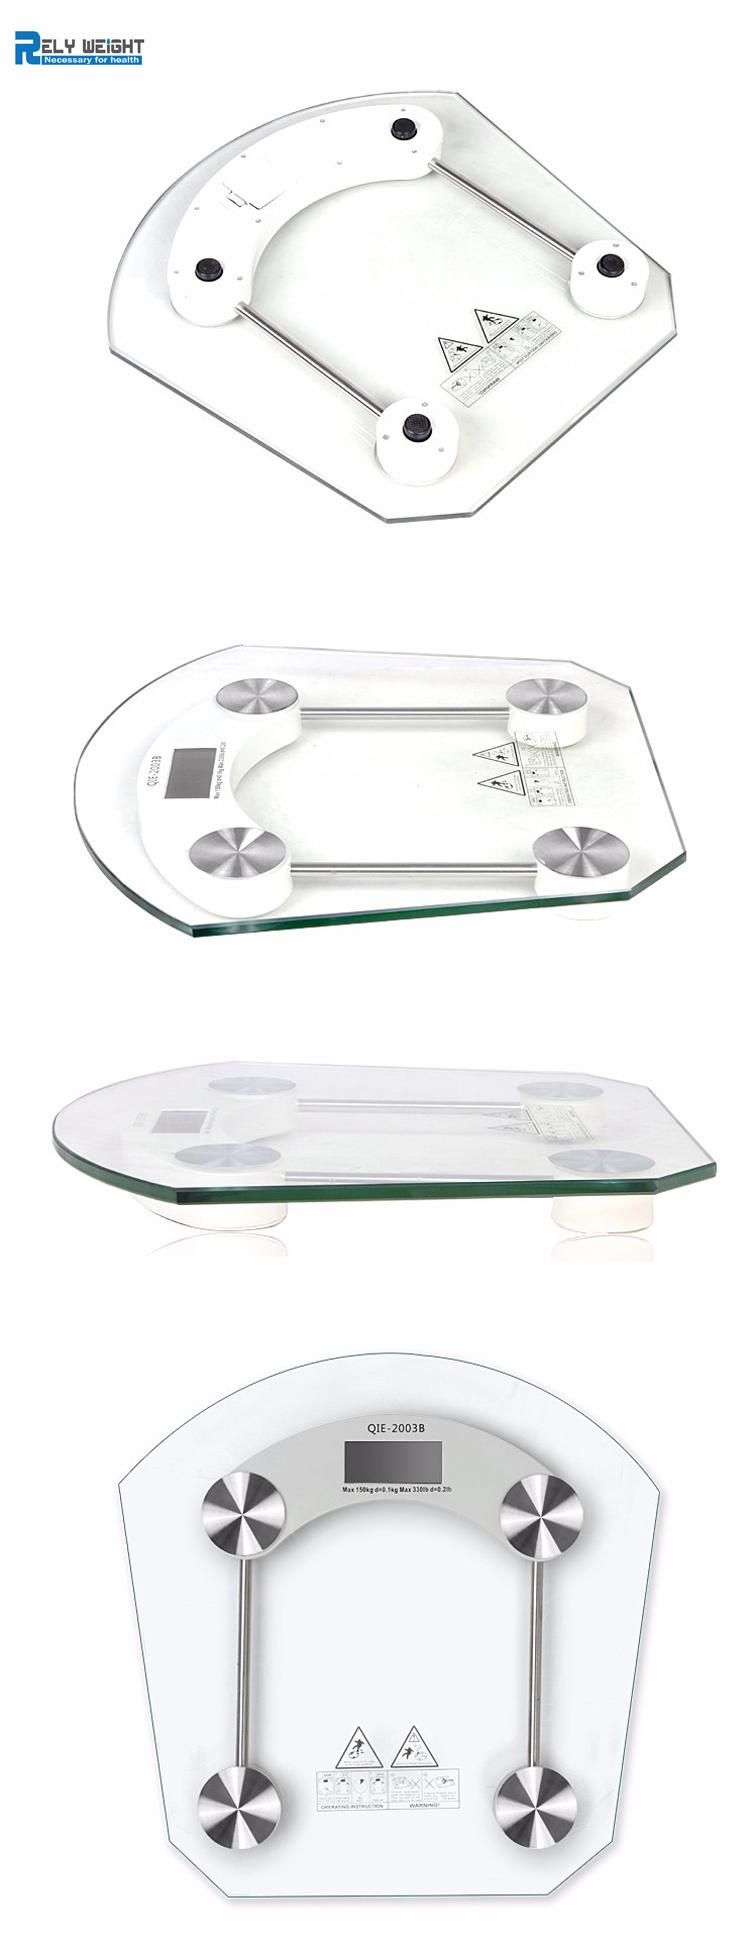 High Quality Classic Model Tempered Glass Smart Digital Bathroom Weighing Scale